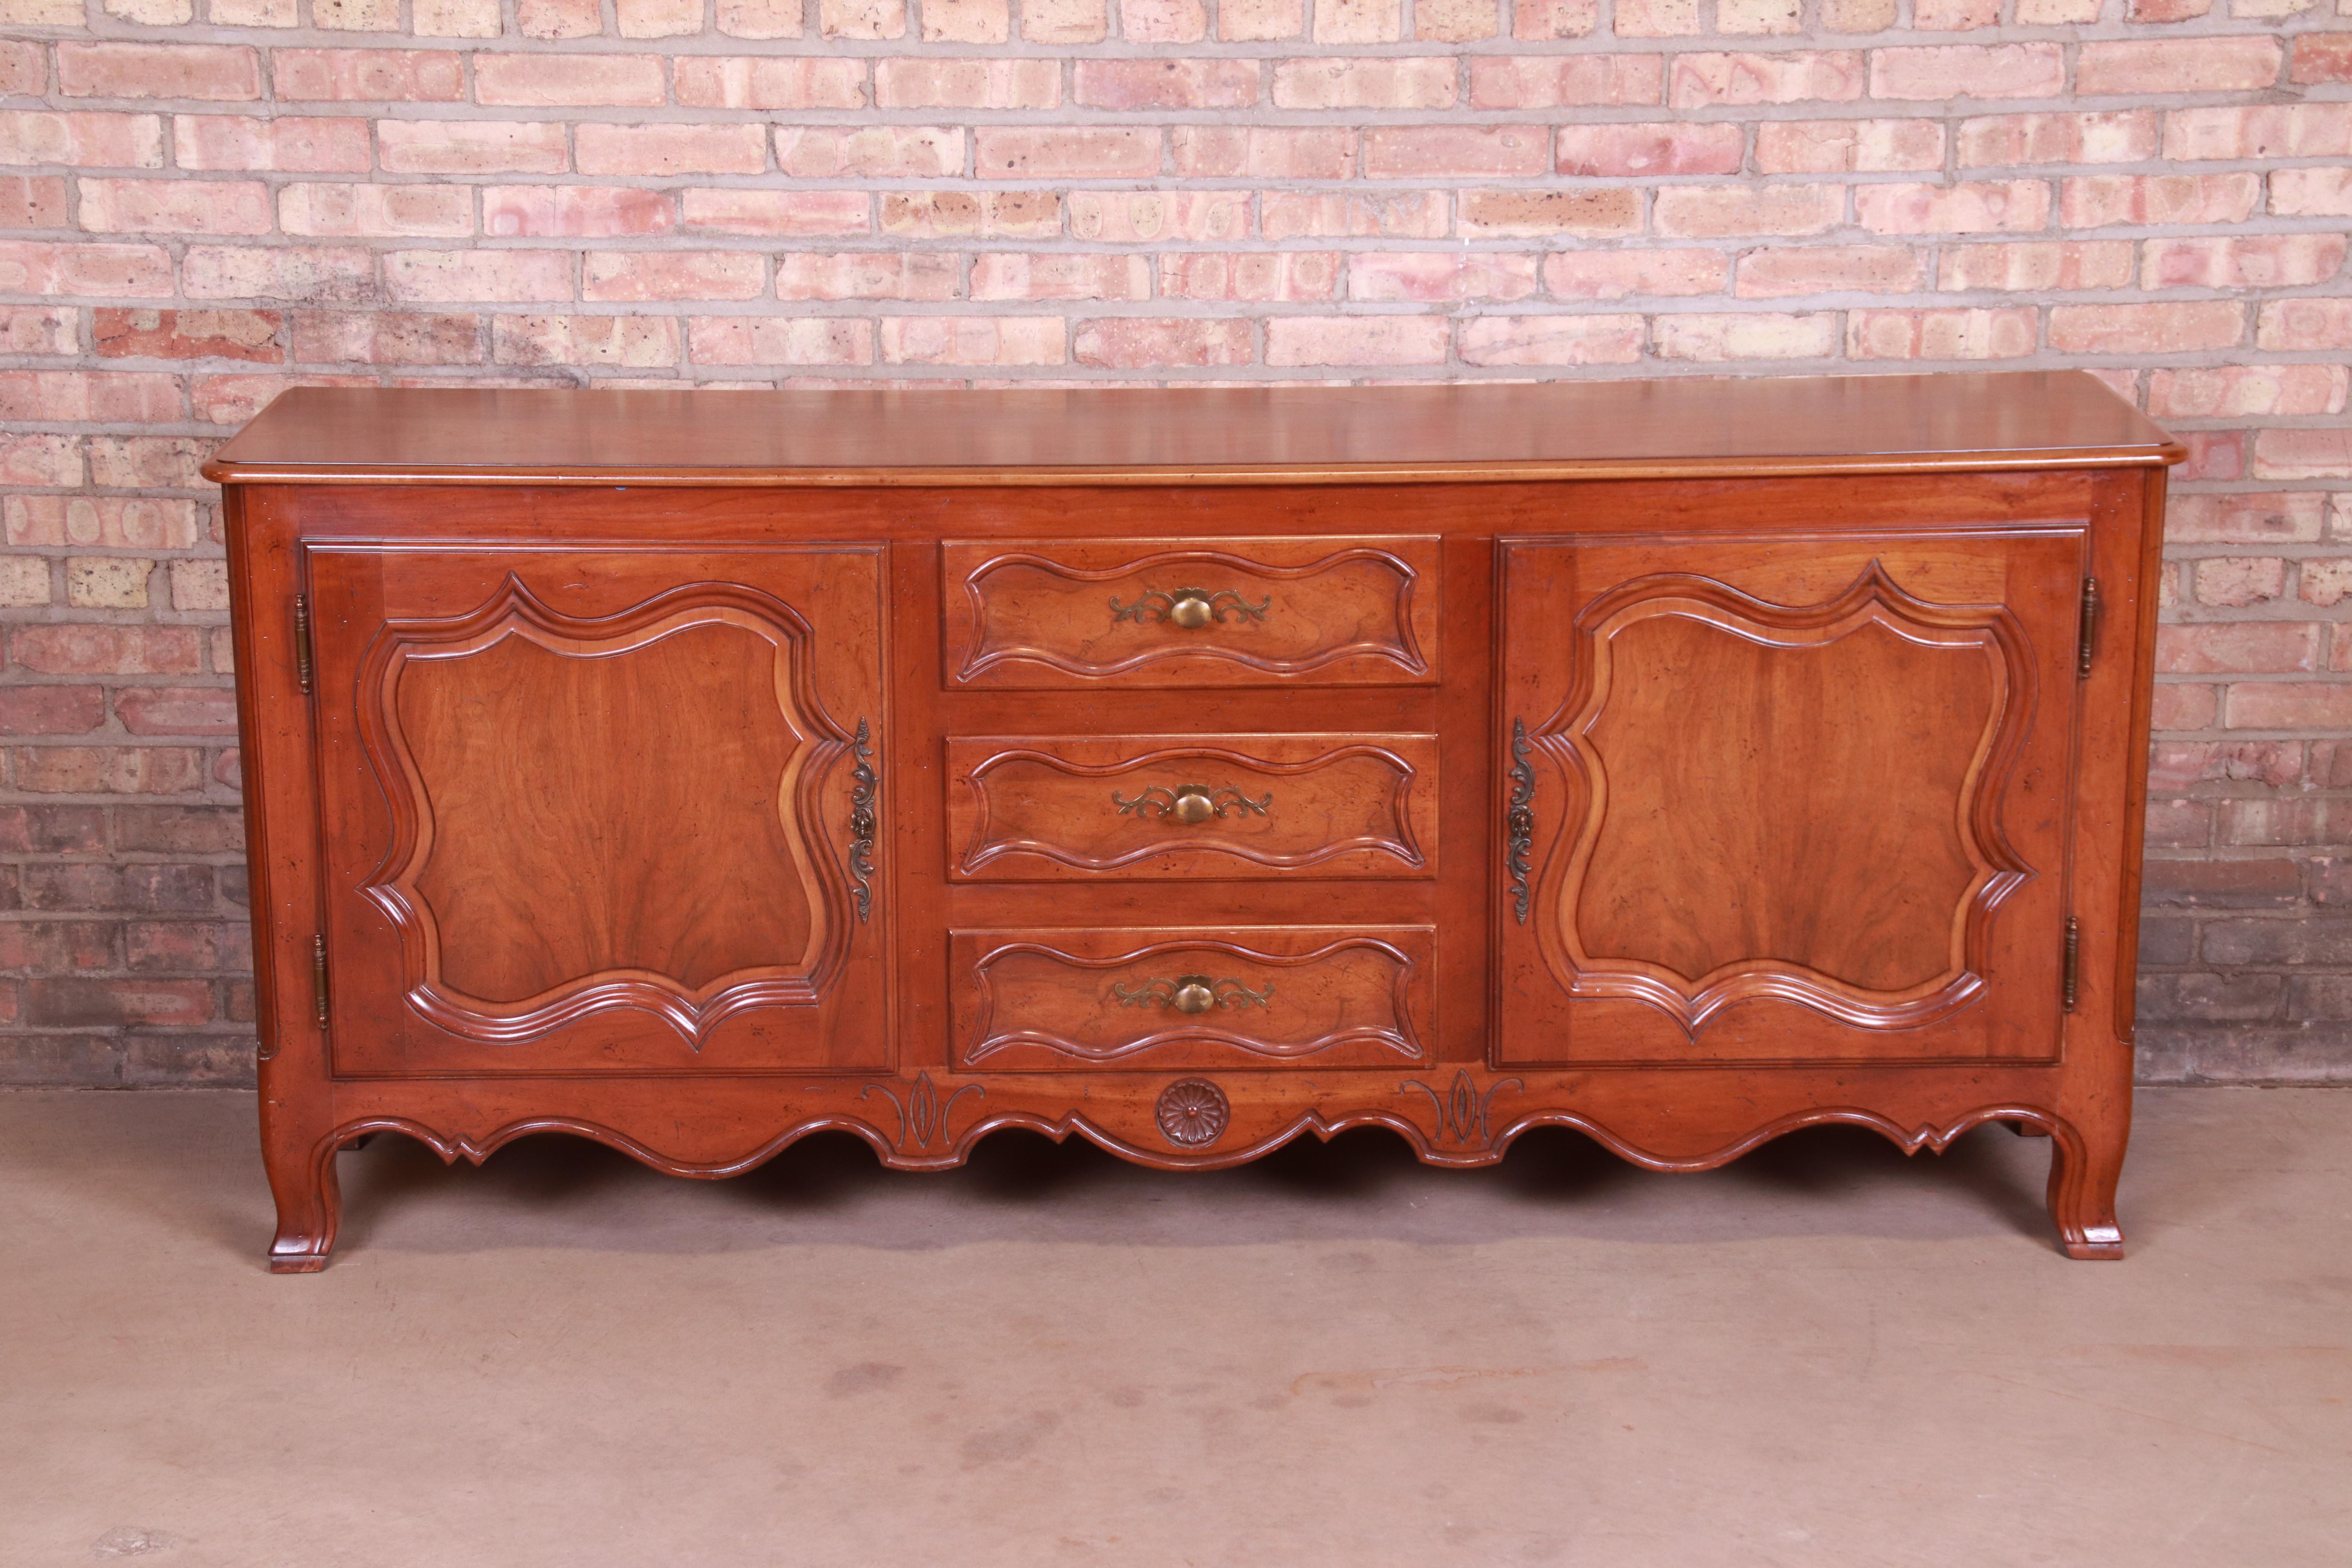 An exceptional French Provincial Louis XV style sideboard, credenza, or bar cabinet

By Baker Furniture 